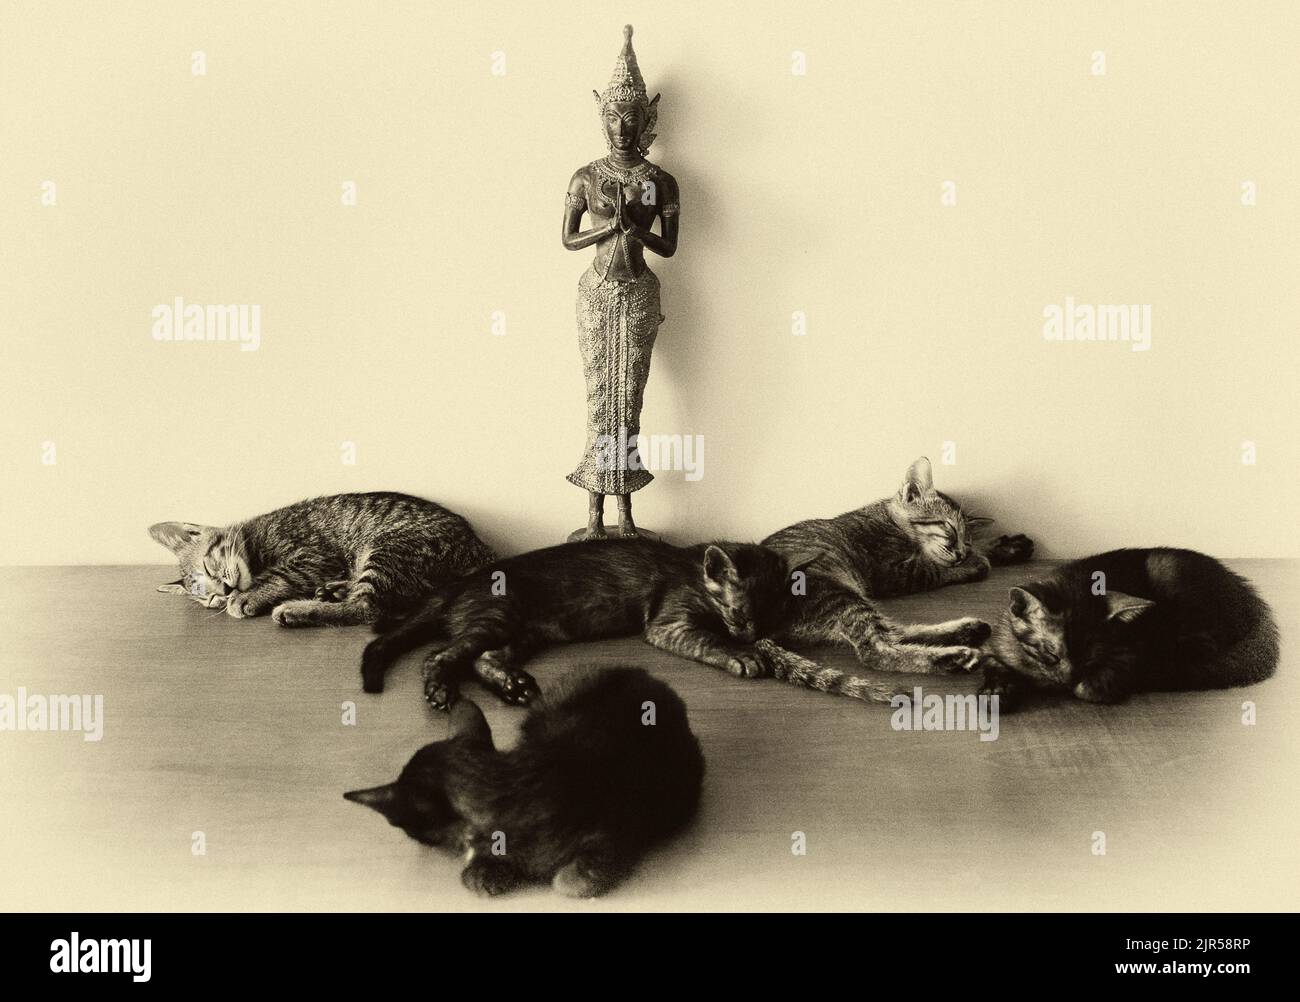 Rome, Italy: a group of kittens sleep at the foot of a buddha statue Stock Photo